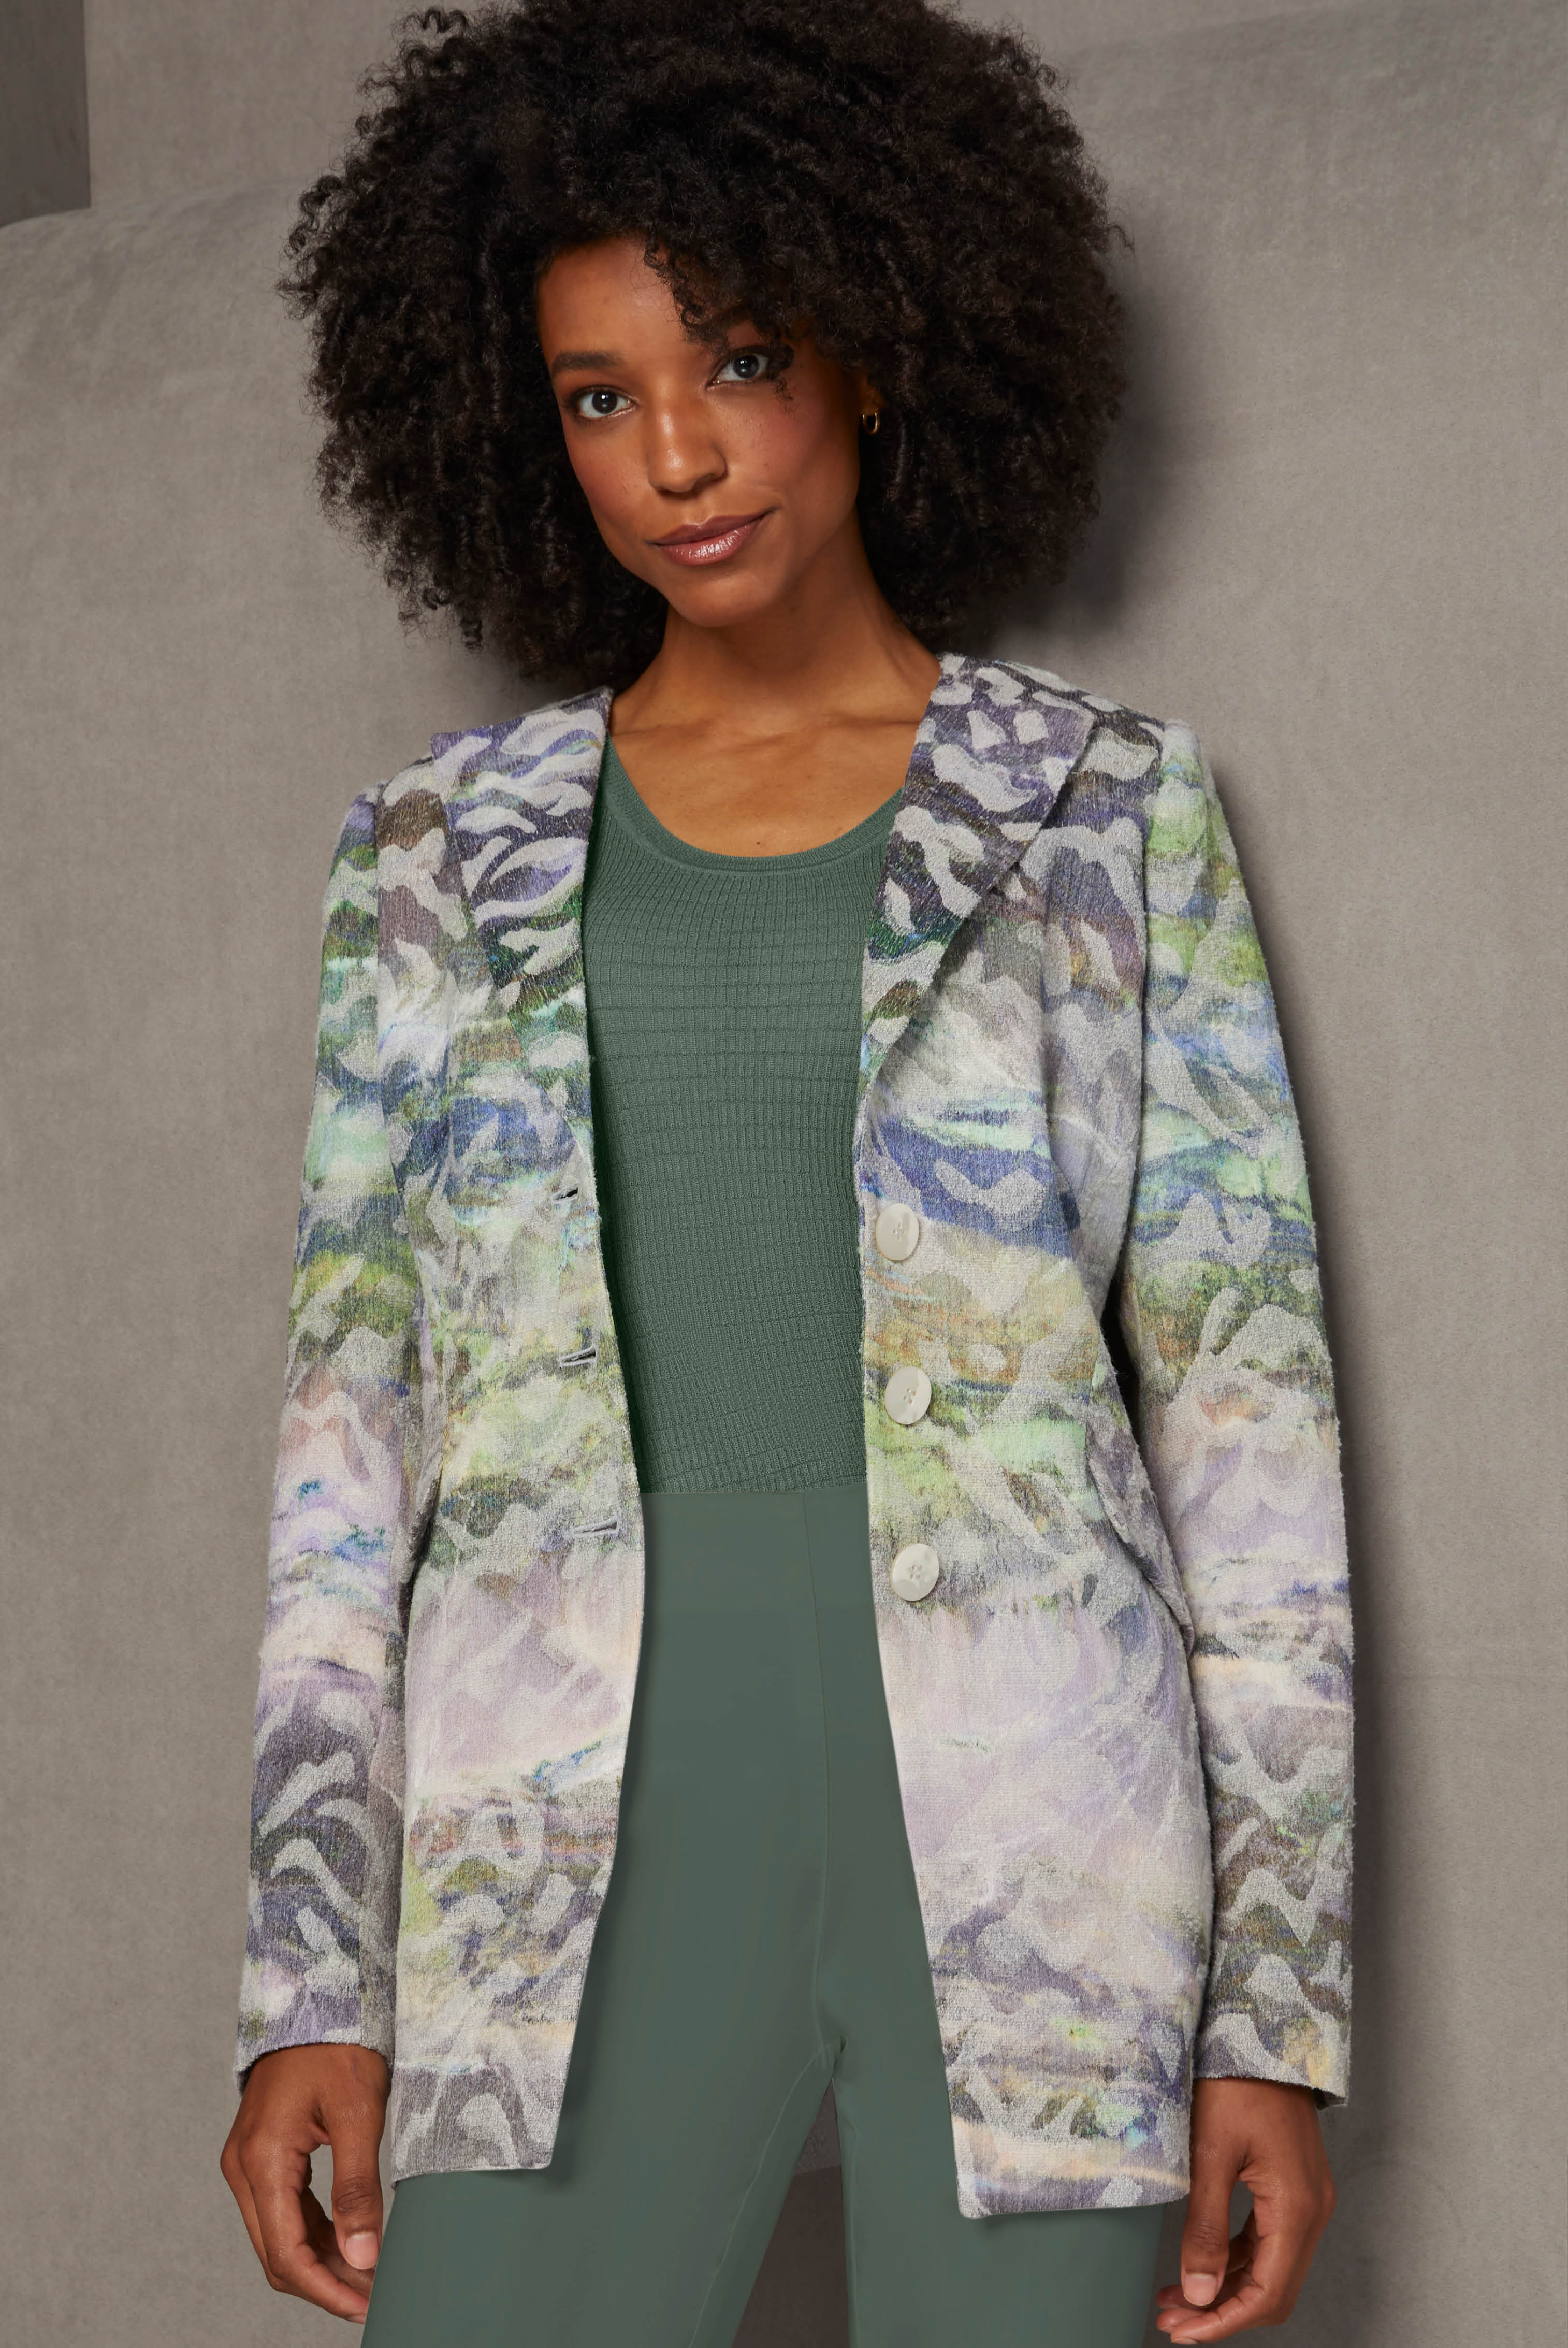 This unique Italian jacquard jacket features an abstract leaf pattern resembling a forest at sunset, set against an ombré background. Picking up the sylvan theme are a knit top and pants in laurel wreath green.